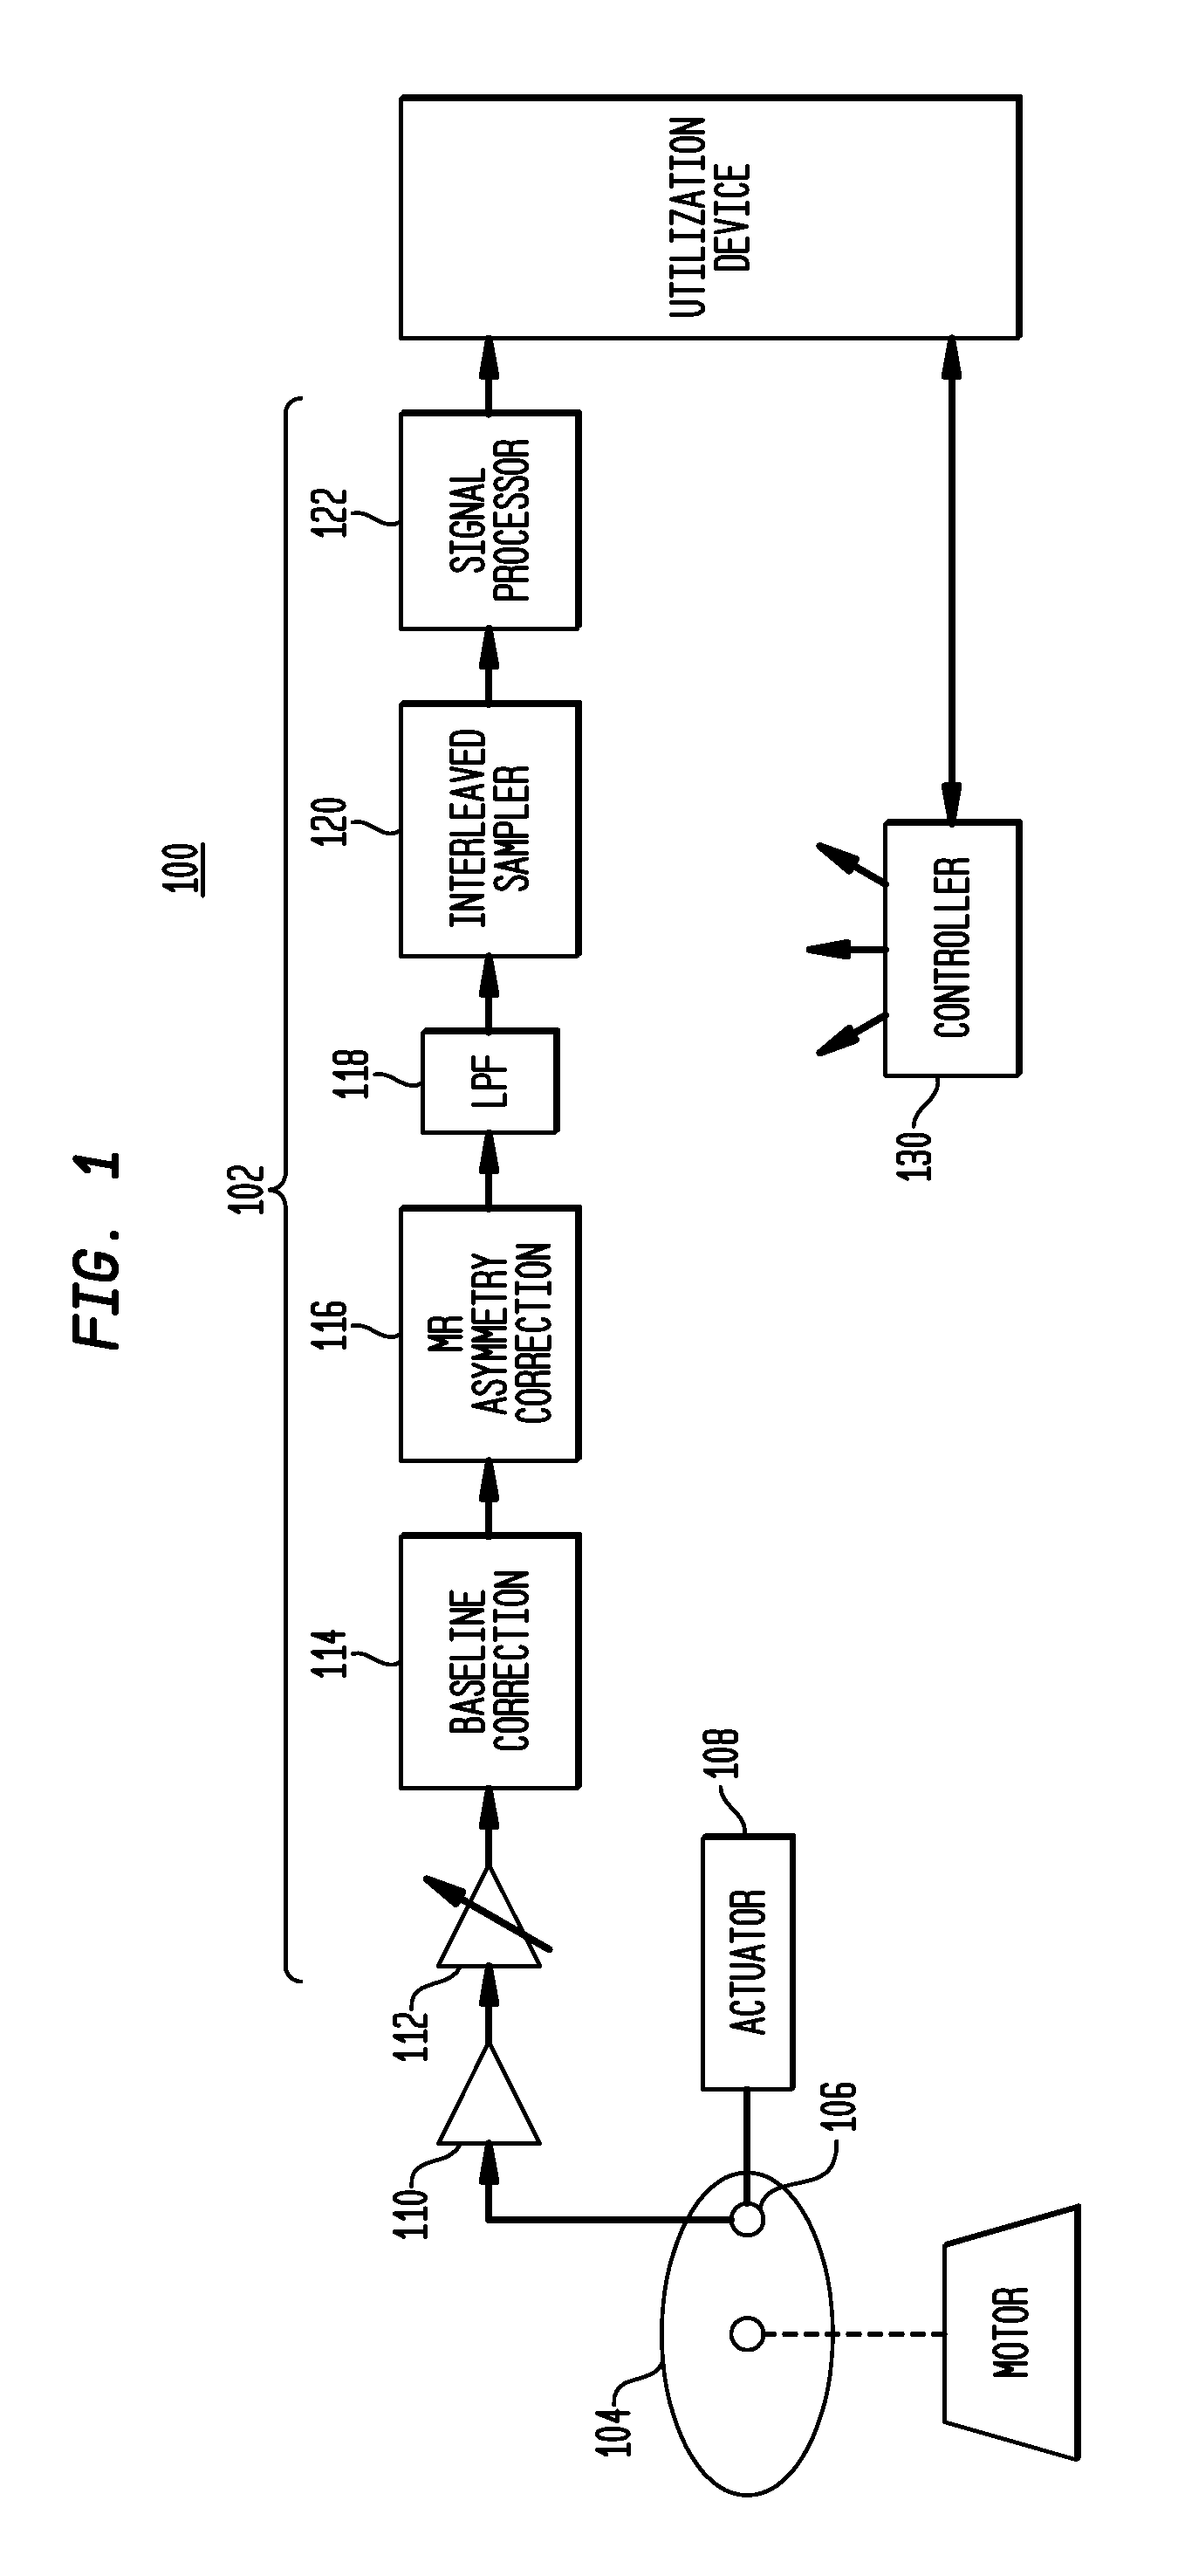 Offset-induced signal cancellation in an interleaved sampling system